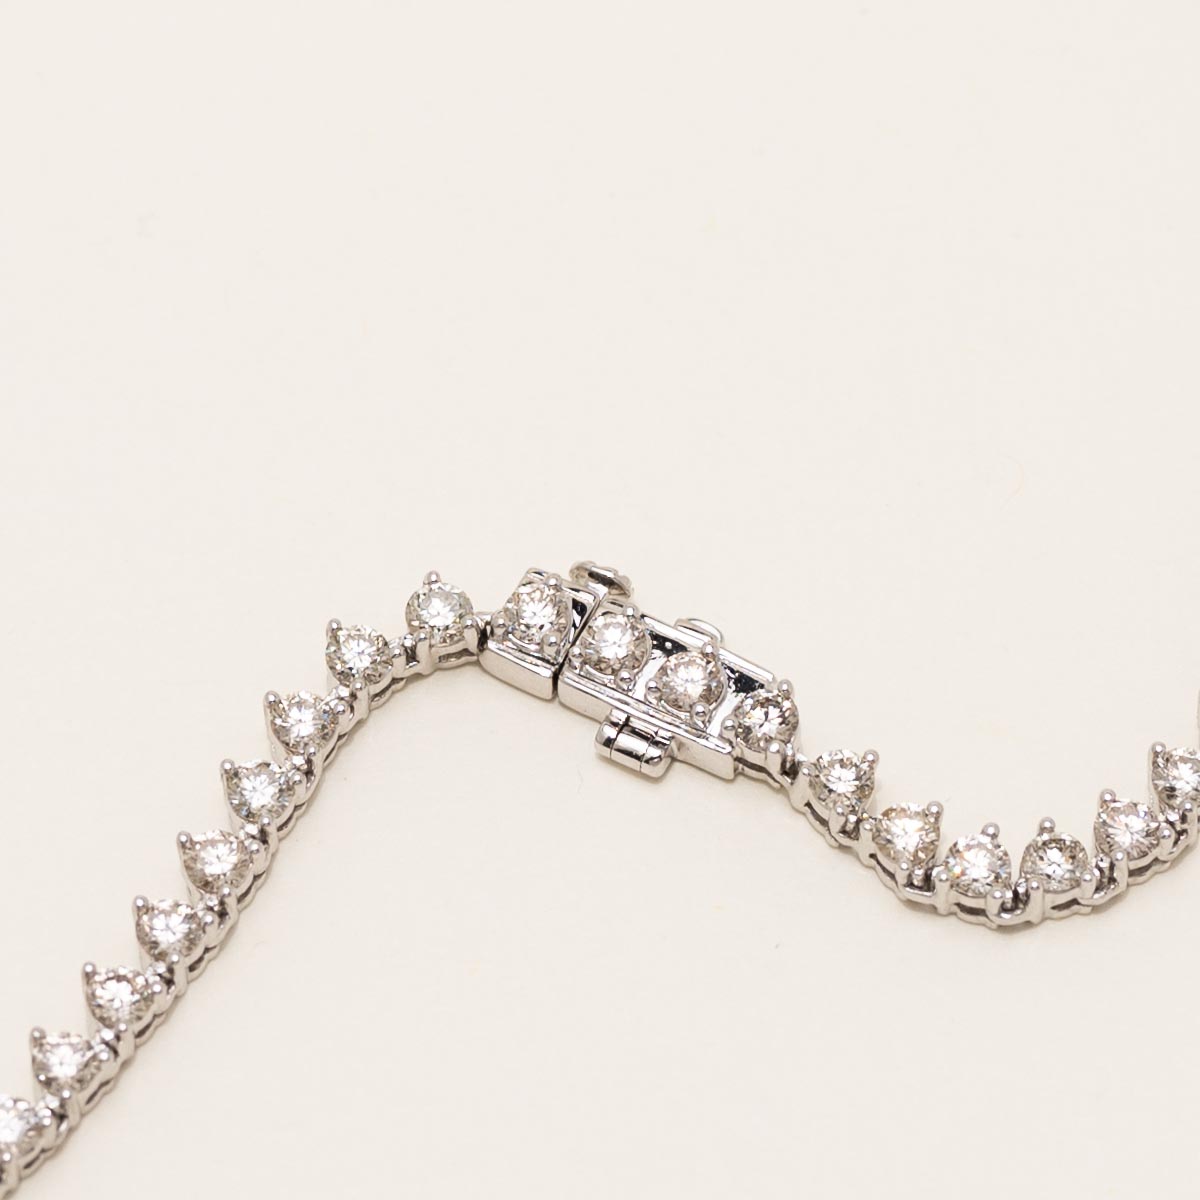 Diamond Tennis Necklace in 14kt White Gold (11ct tw)